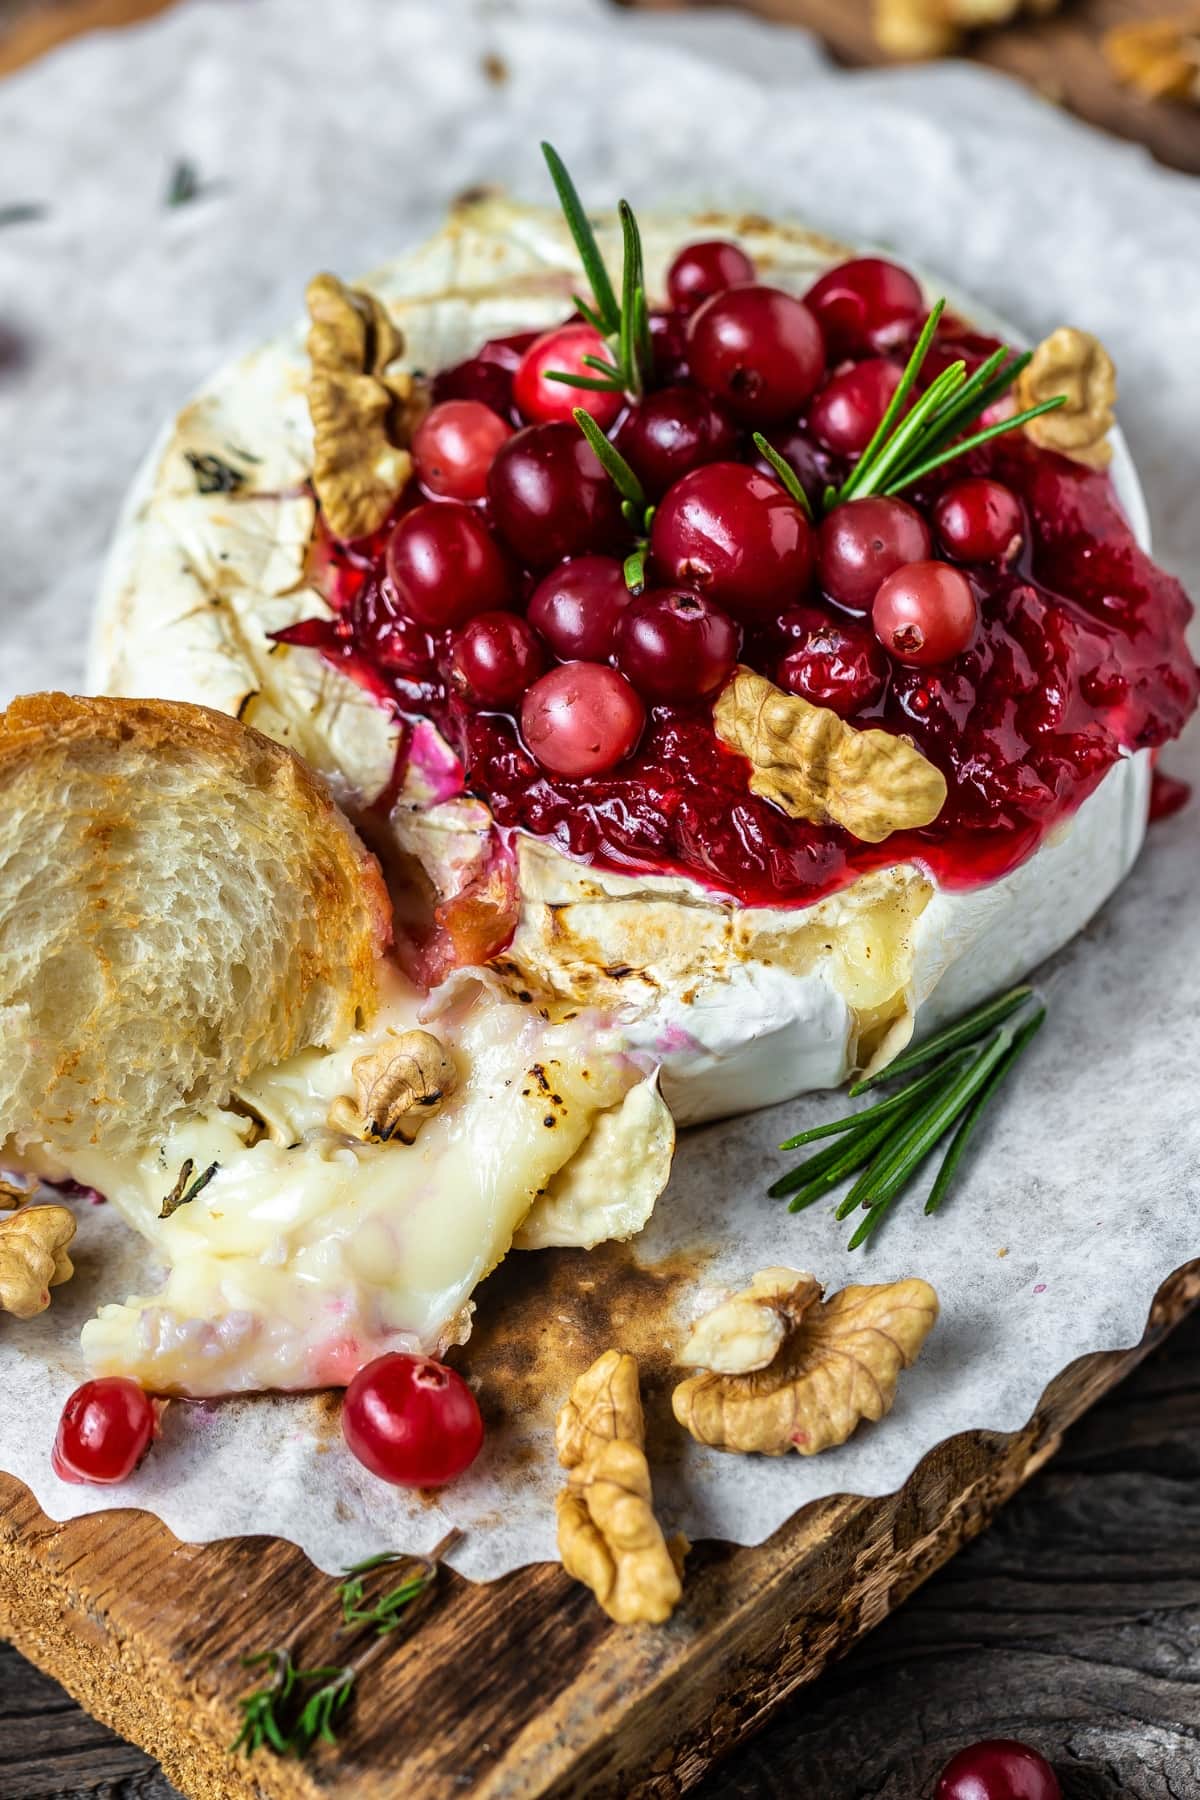 Baked brie with walnuts, cranberries and sauce on a wooden baord